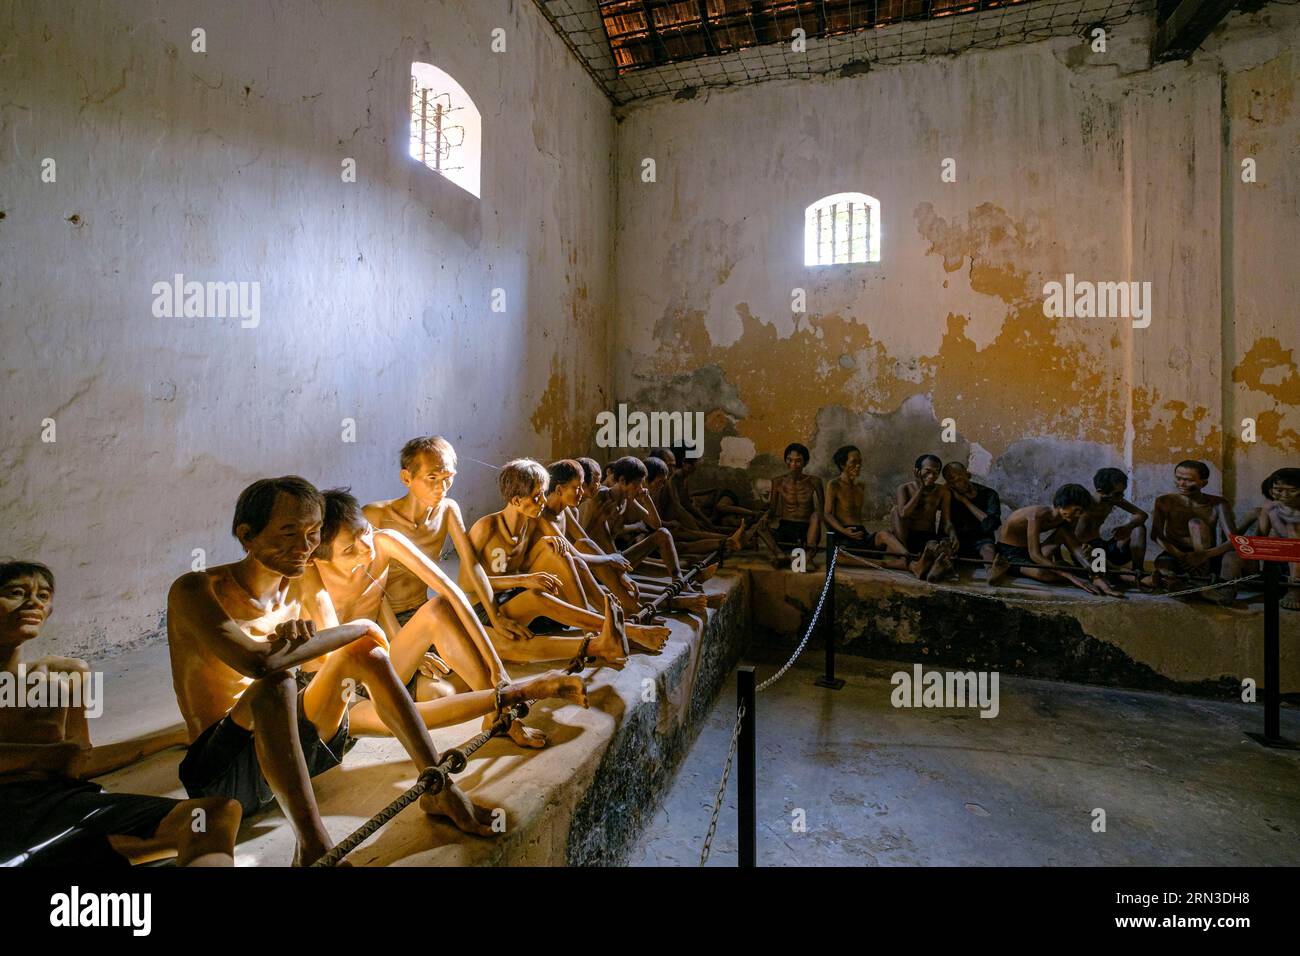 Vietnam, Archipelago of Con Dao, called Poulo-Condor islands during french colonisation, Con Son island, Phu Hai jail Stock Photo